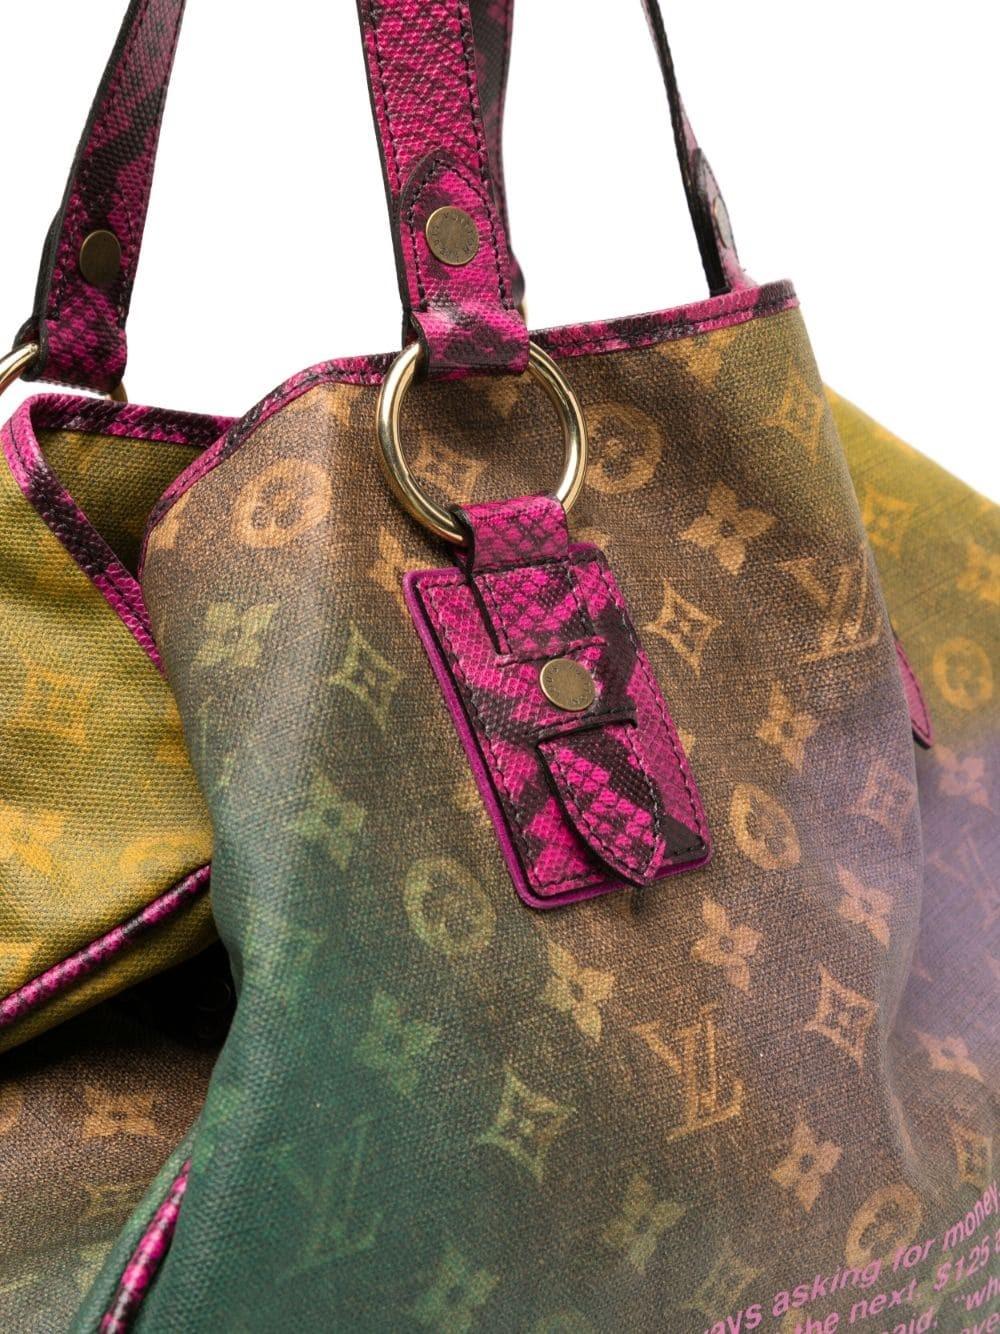 This rare Louis Vuitton Limited Edition Richard Prince Mixed Violet Duderanch Oversized Tote Bag from the 2008 runway collection is sure to turn heads. Crafted of acid colored Monogram canvas and featuring exotic trim, the bag features a signature